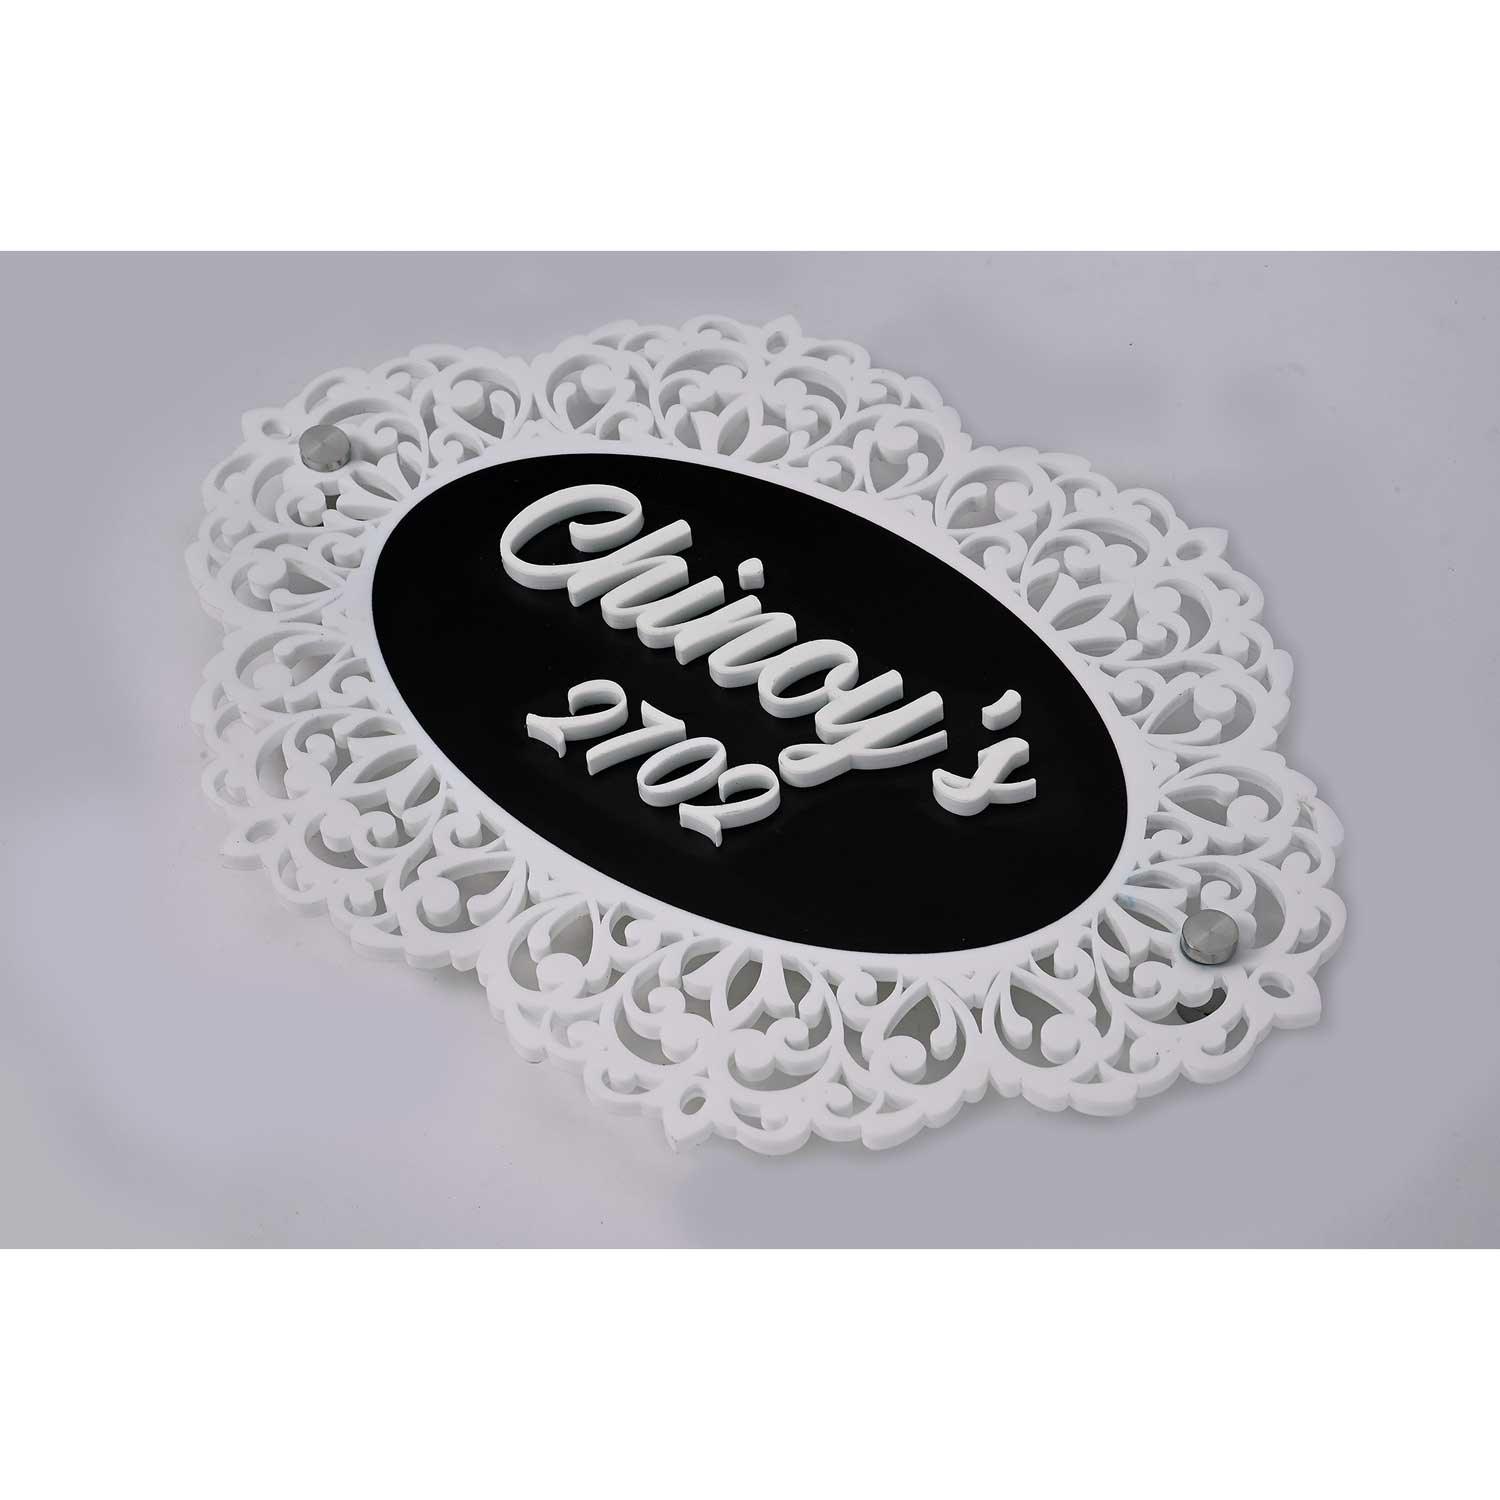 Chinoy's - Acrylic Name Plate with Raised Lettering - Housenama